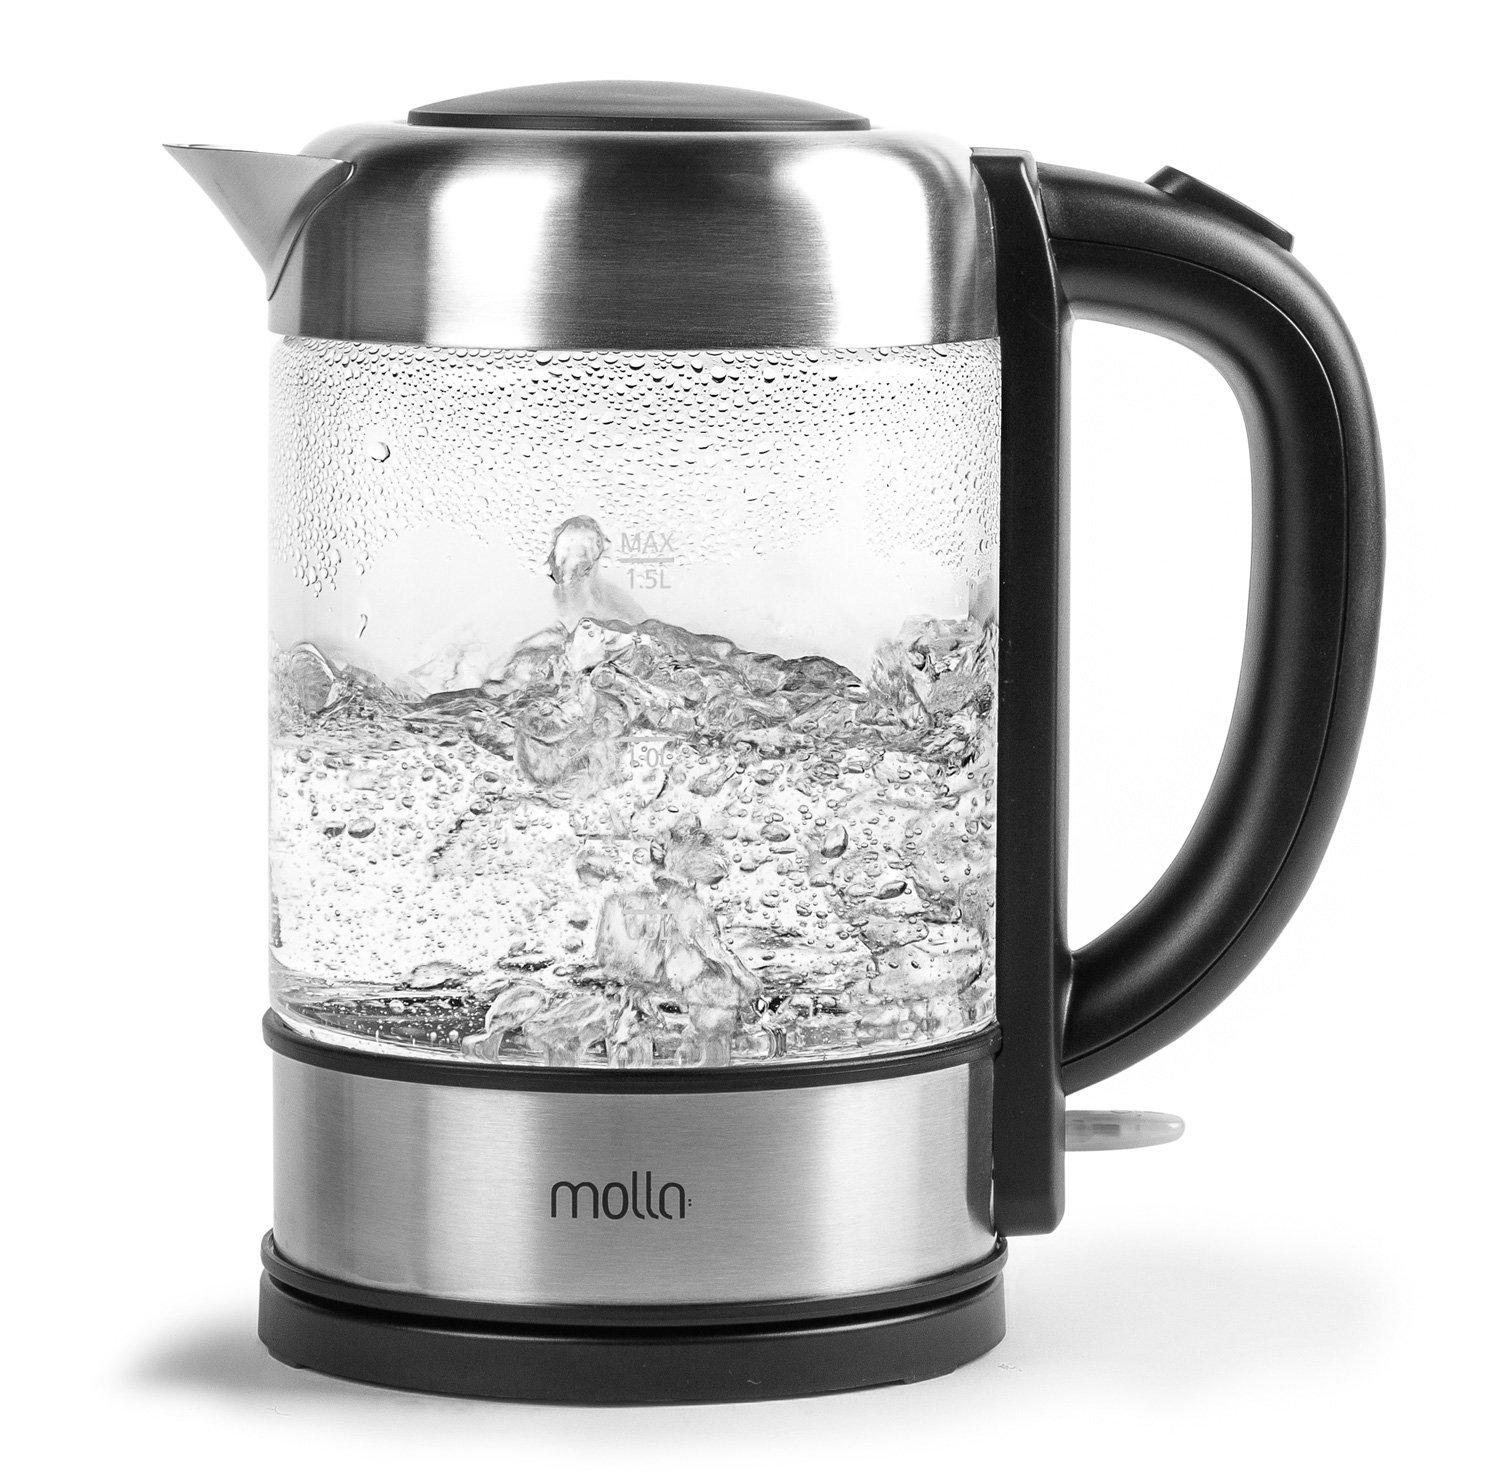 Molla glass kettle with temperature control